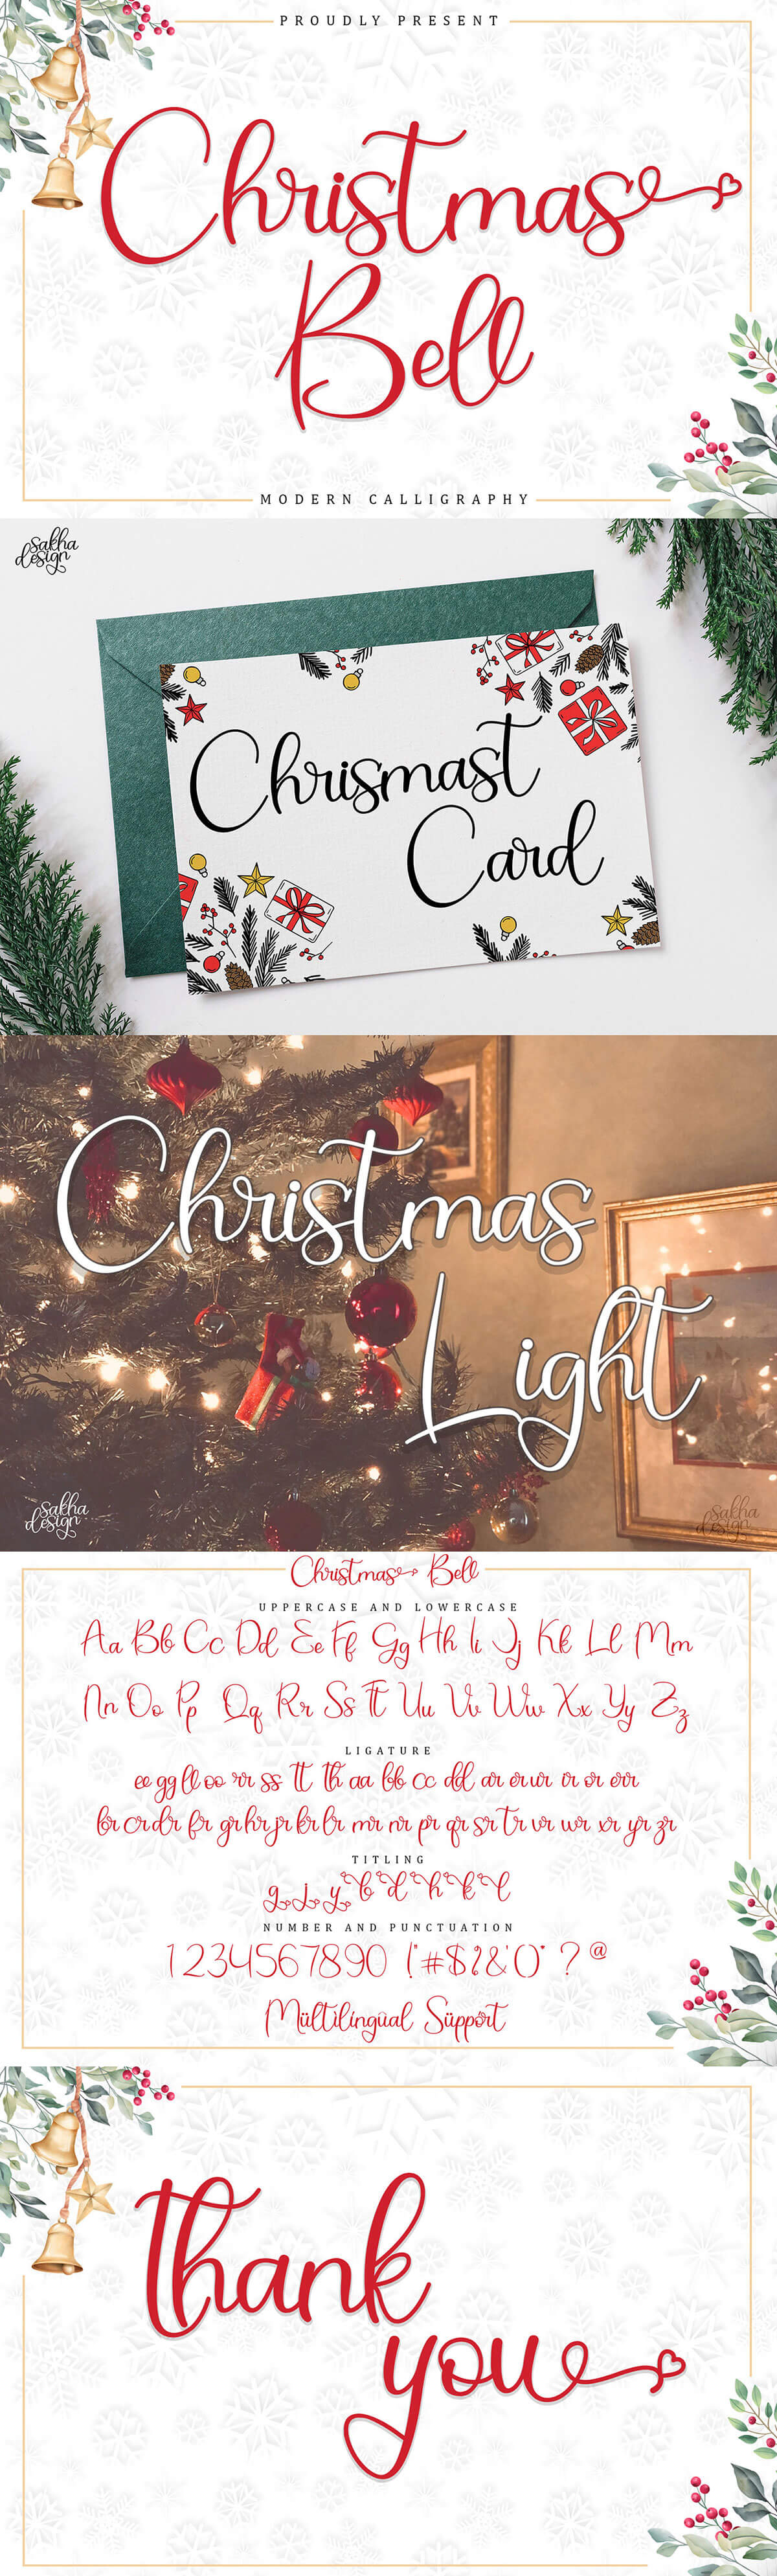 Free Christmas Bell Calligraphy Font